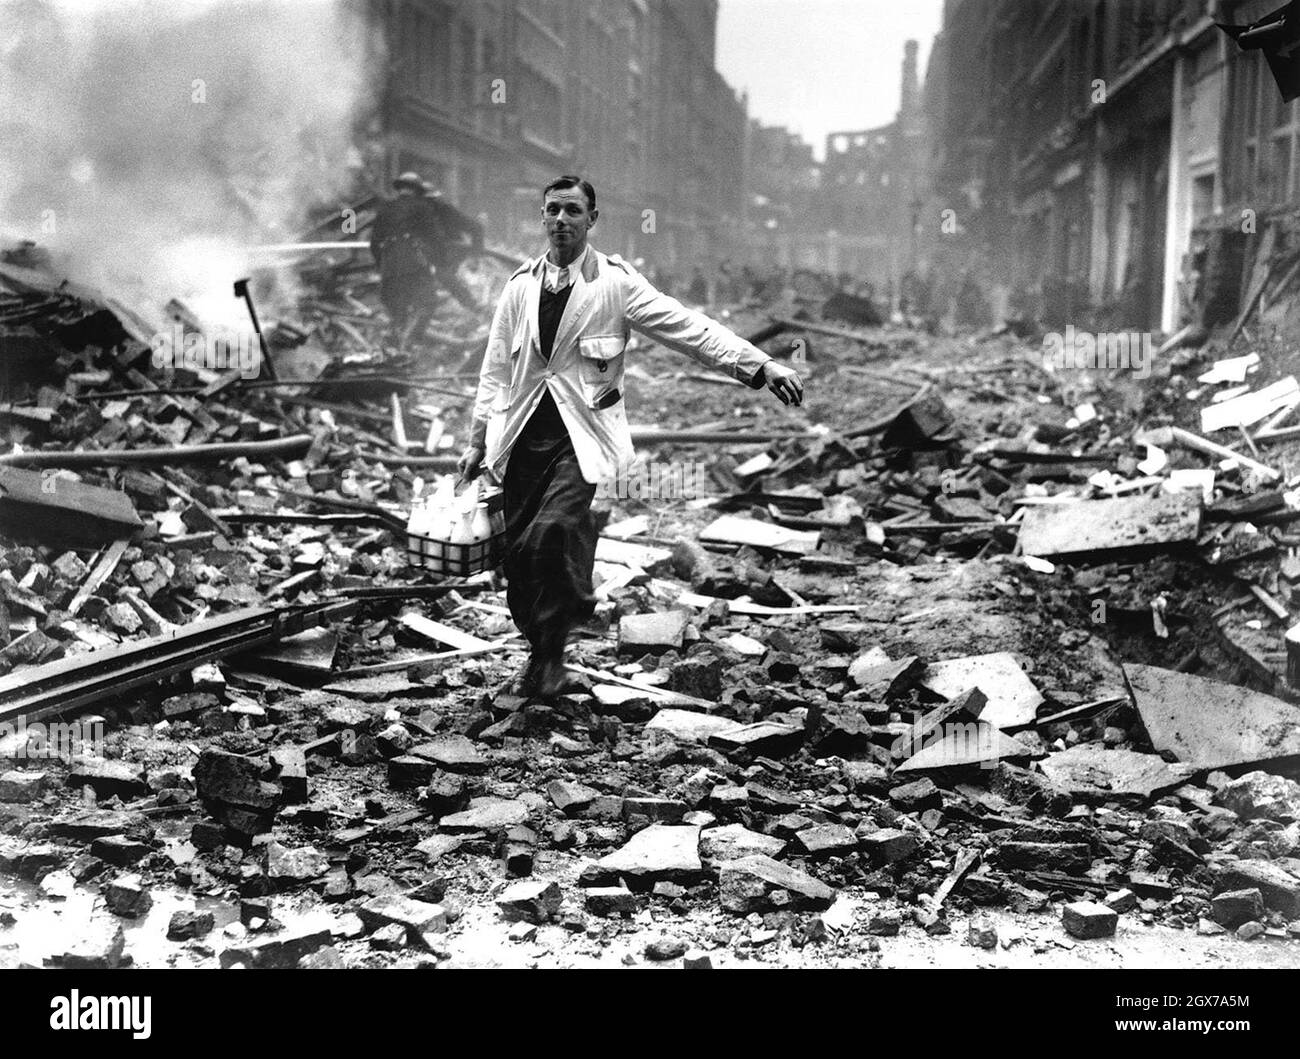 A London milkman delivering milk to homes, walking acrossa rubble filled street, showing Business As Usual Stock Photo